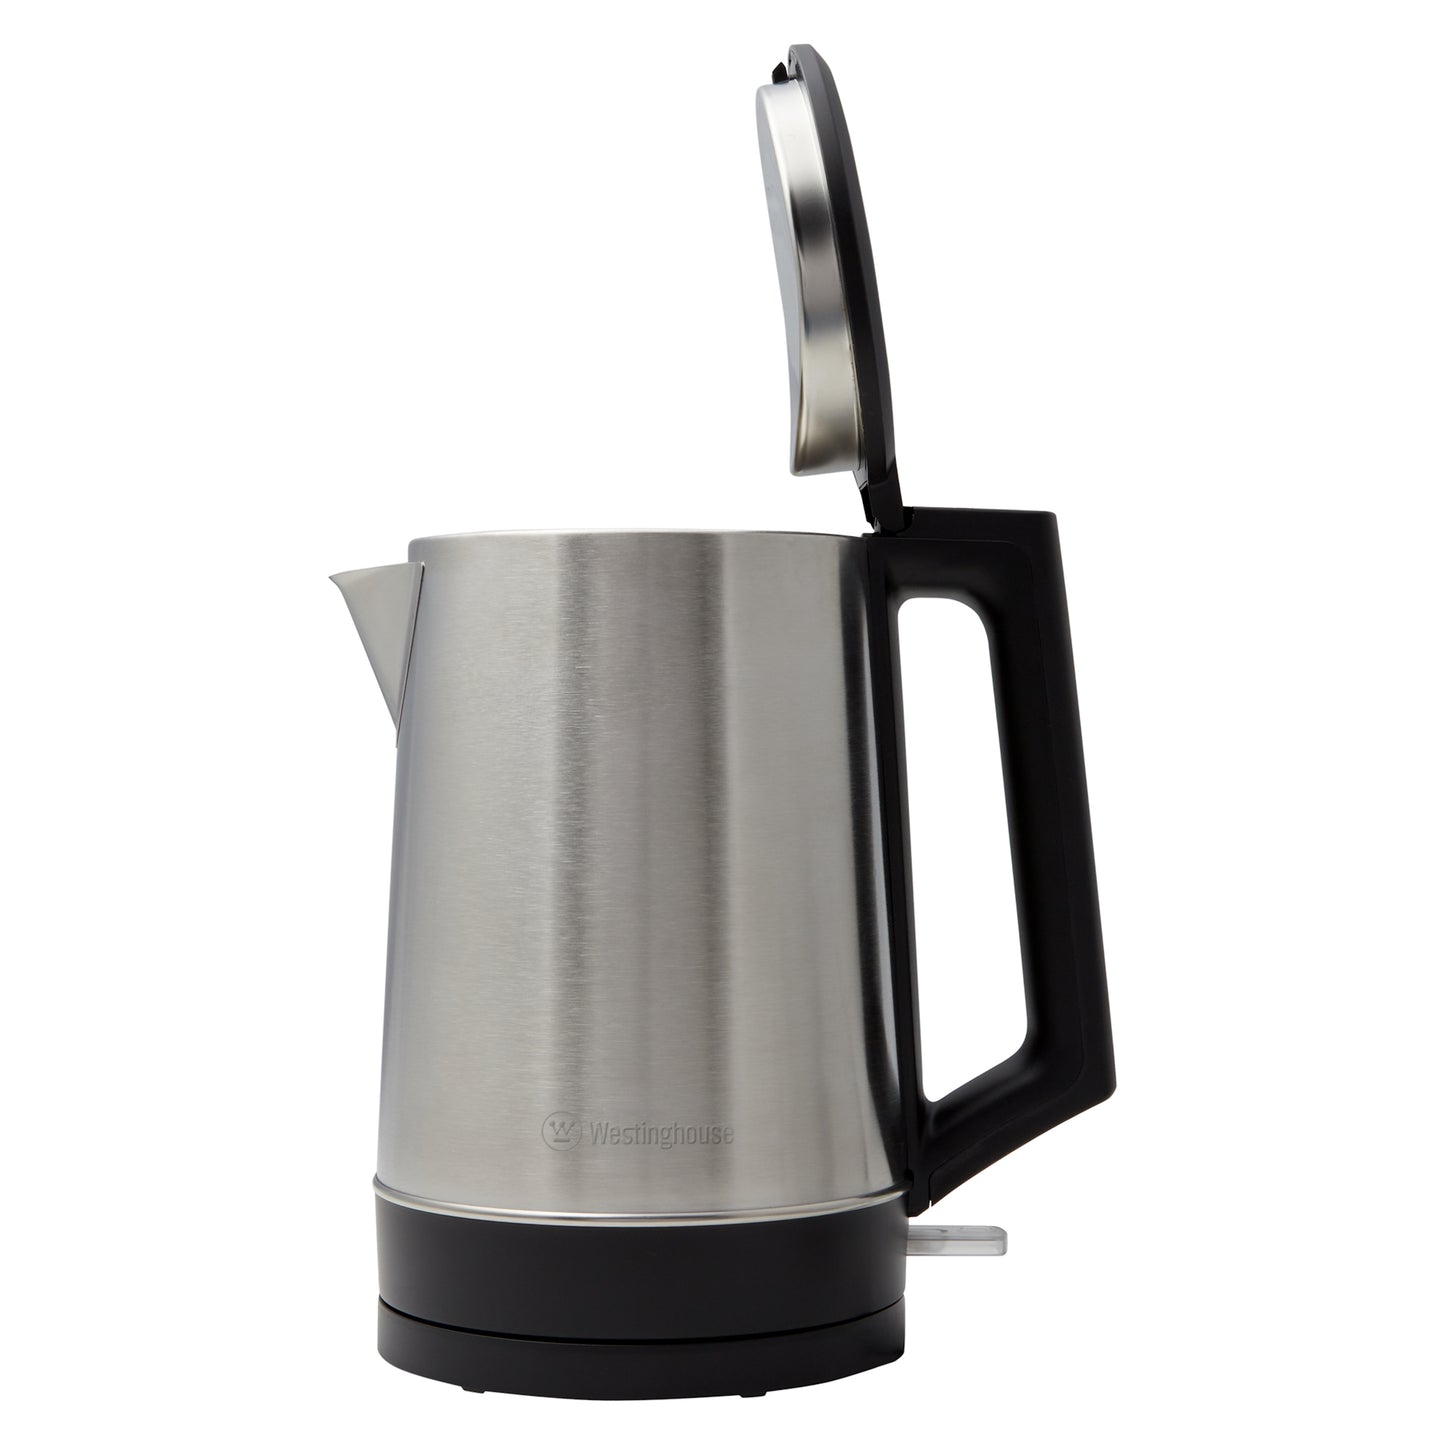 Westinghouse Kettle 1.7L 1800W Stainless Steel